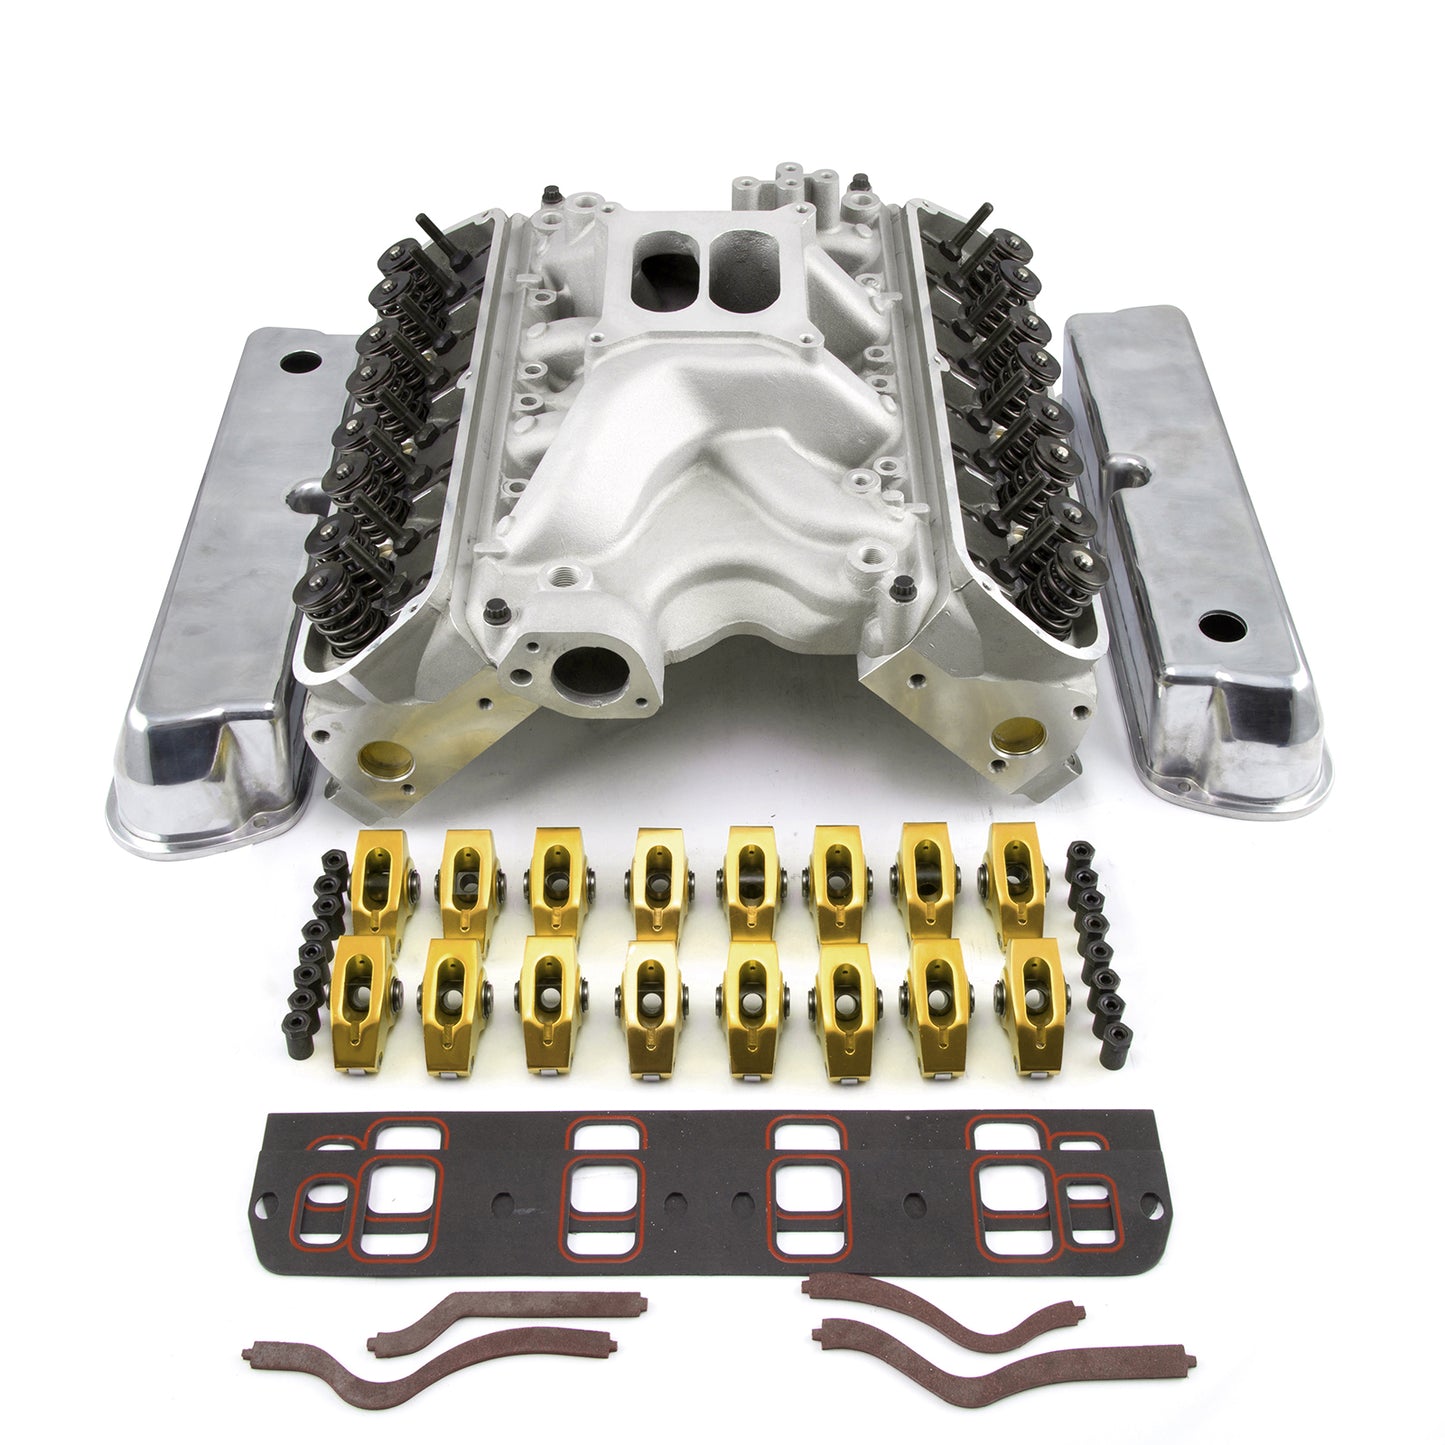 Speedmaster PCE435.1073 Fits Ford 351W Windsor Hyd FT 175cc Cylinder Head Top End Engine Combo Kit